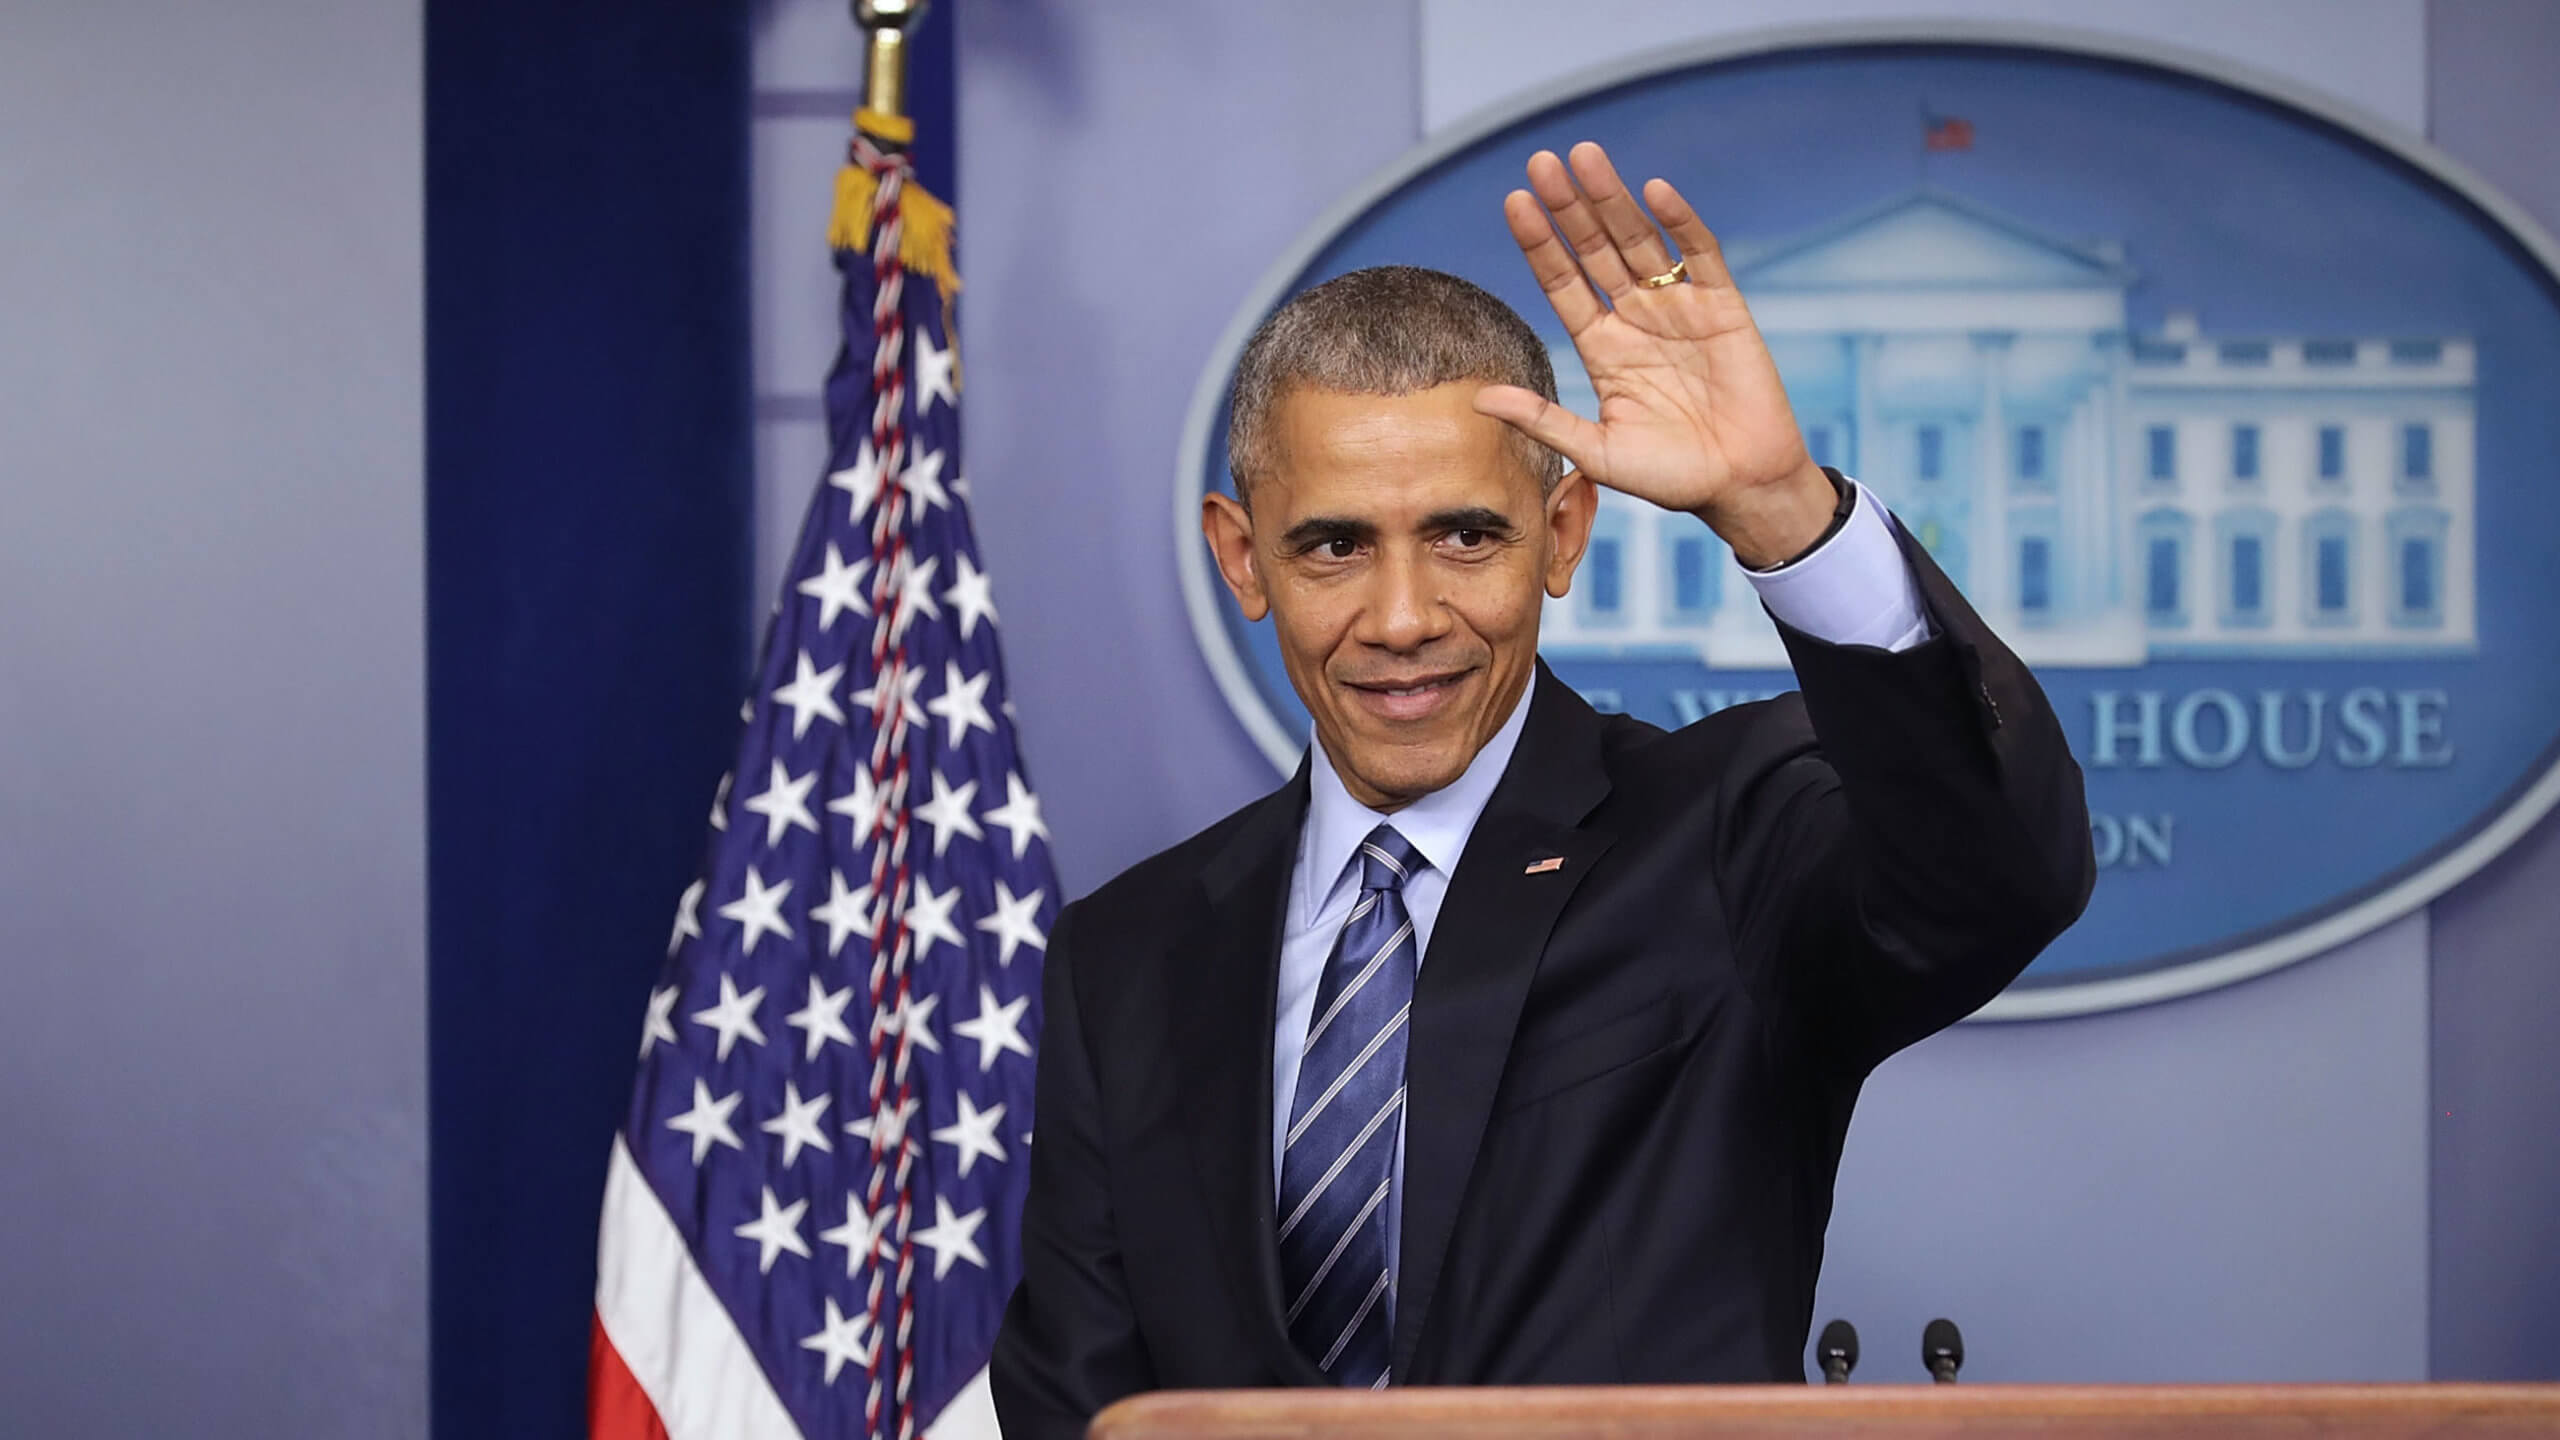 President Obama waves goodbye at the conclusion of a news conference at the White House on Dec. 16.